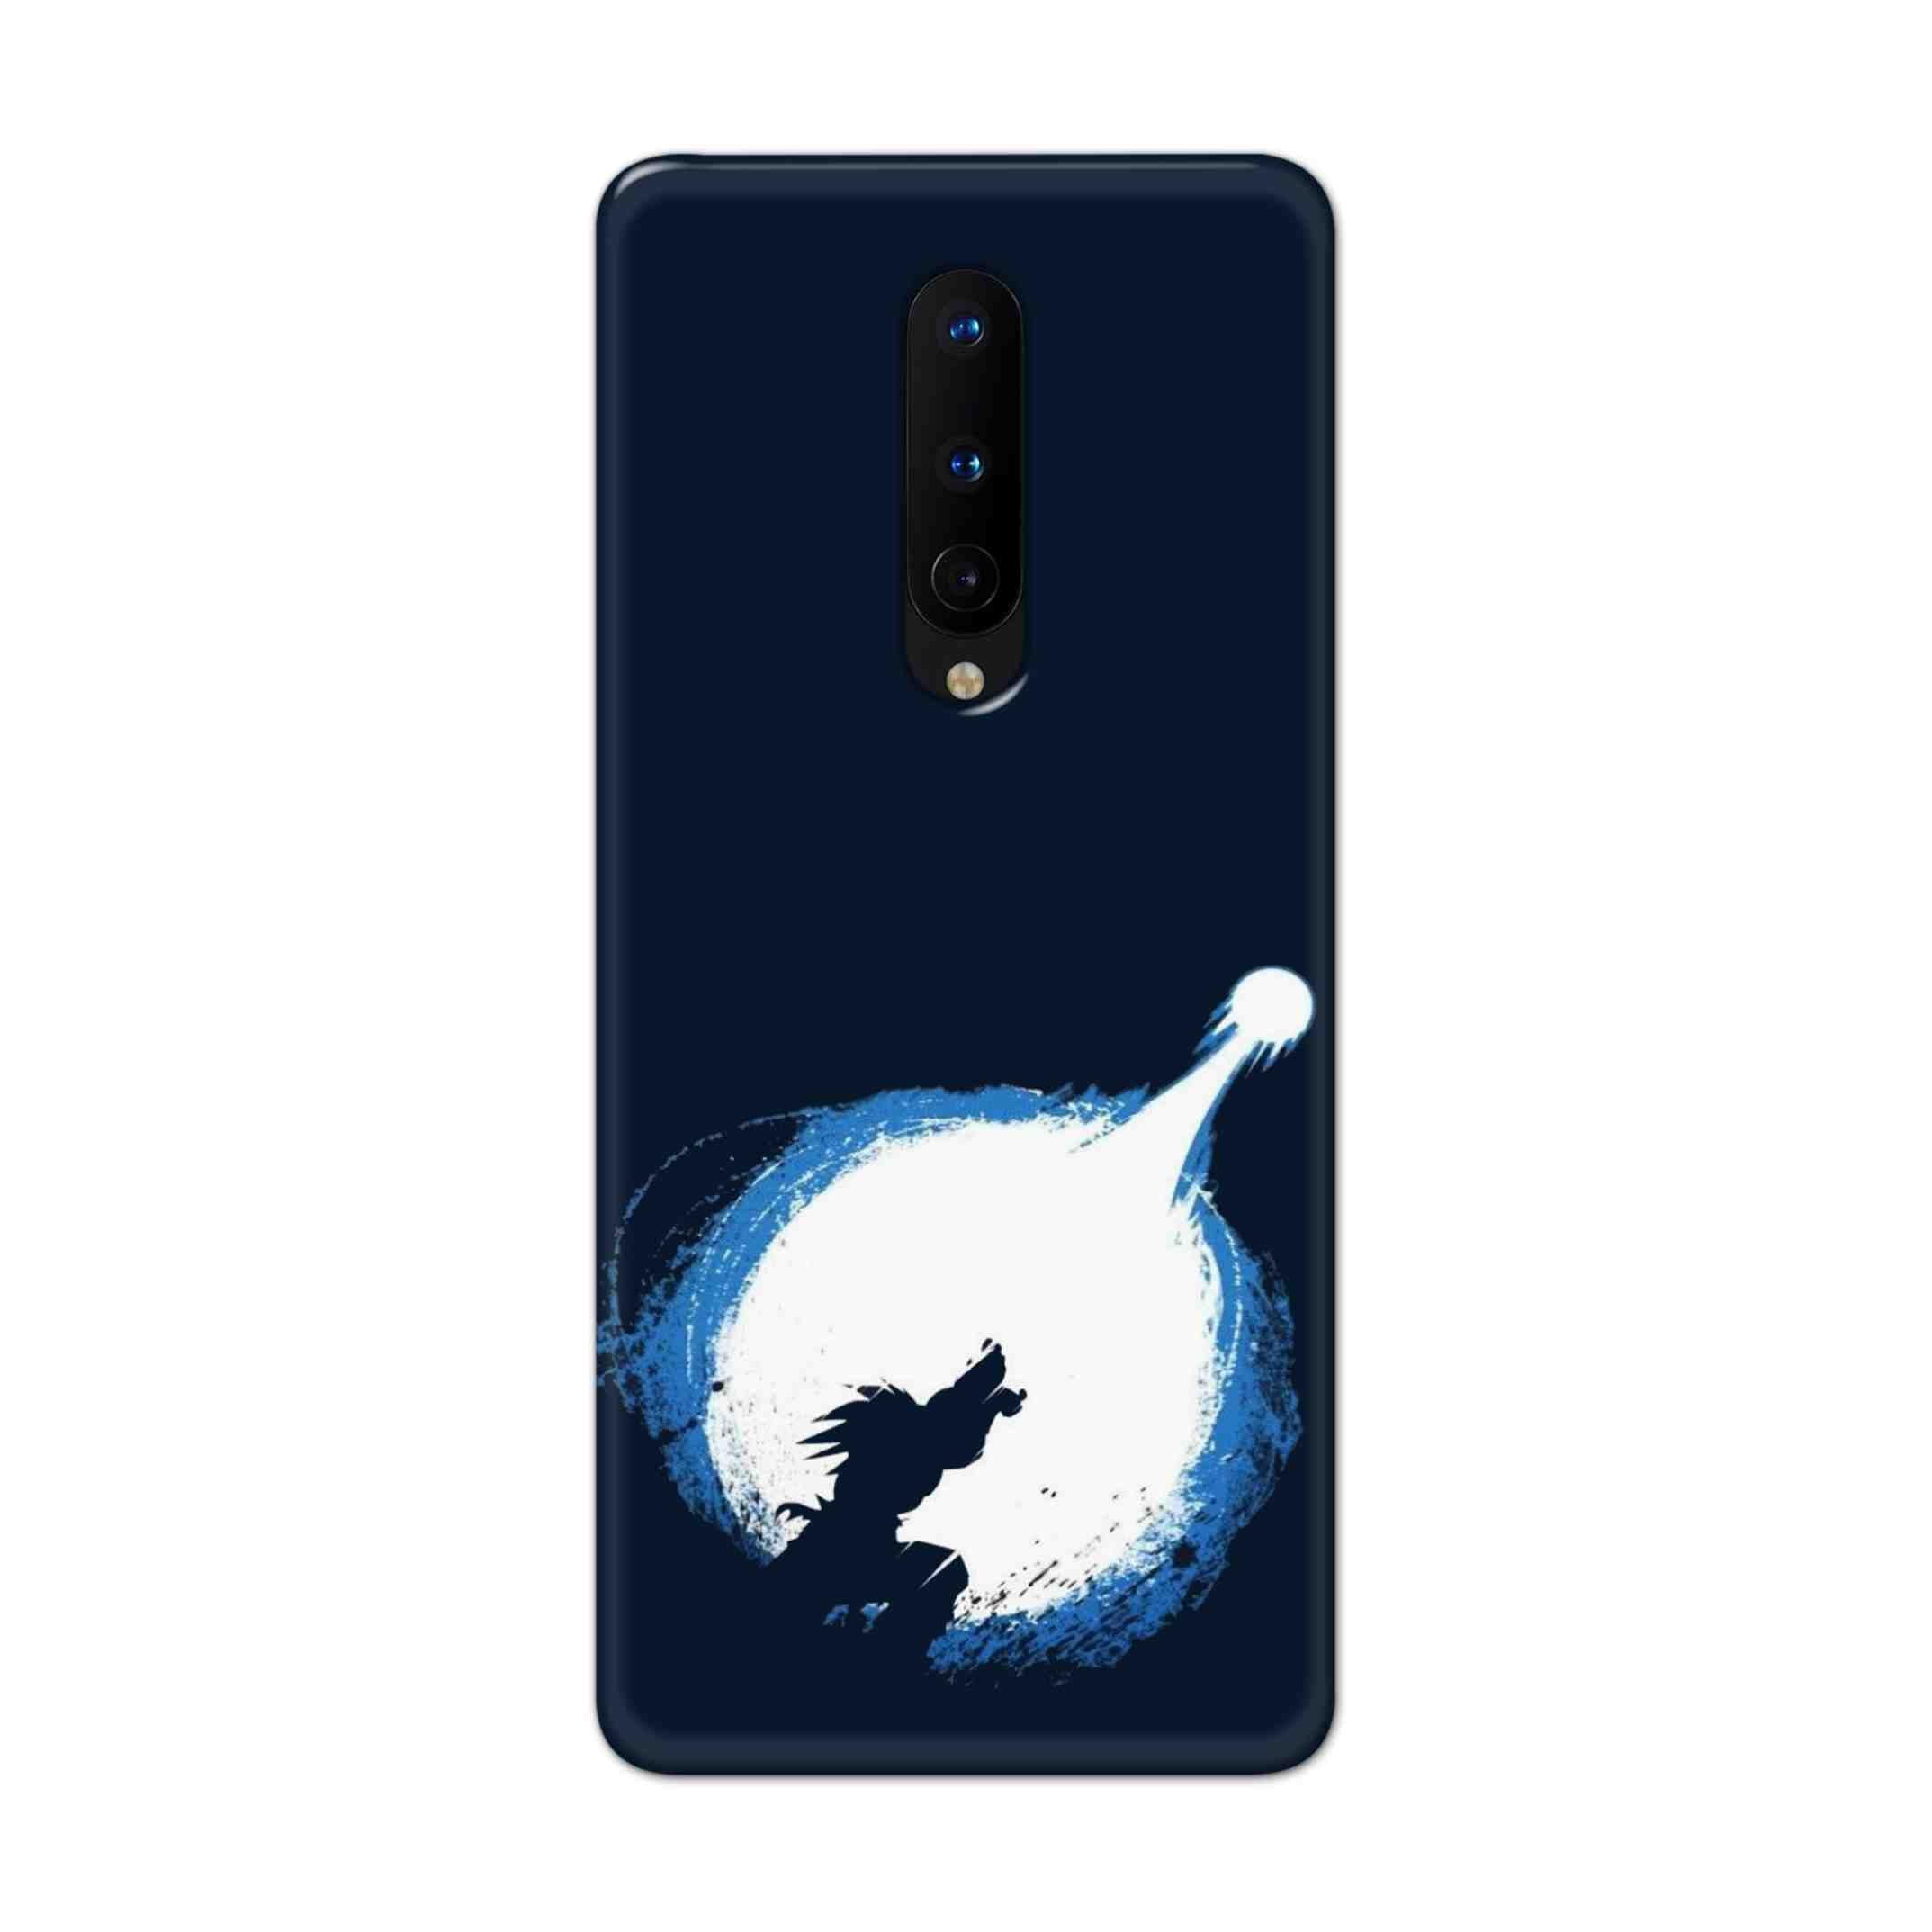 Buy Goku Power Hard Back Mobile Phone Case Cover For OnePlus 8 Online